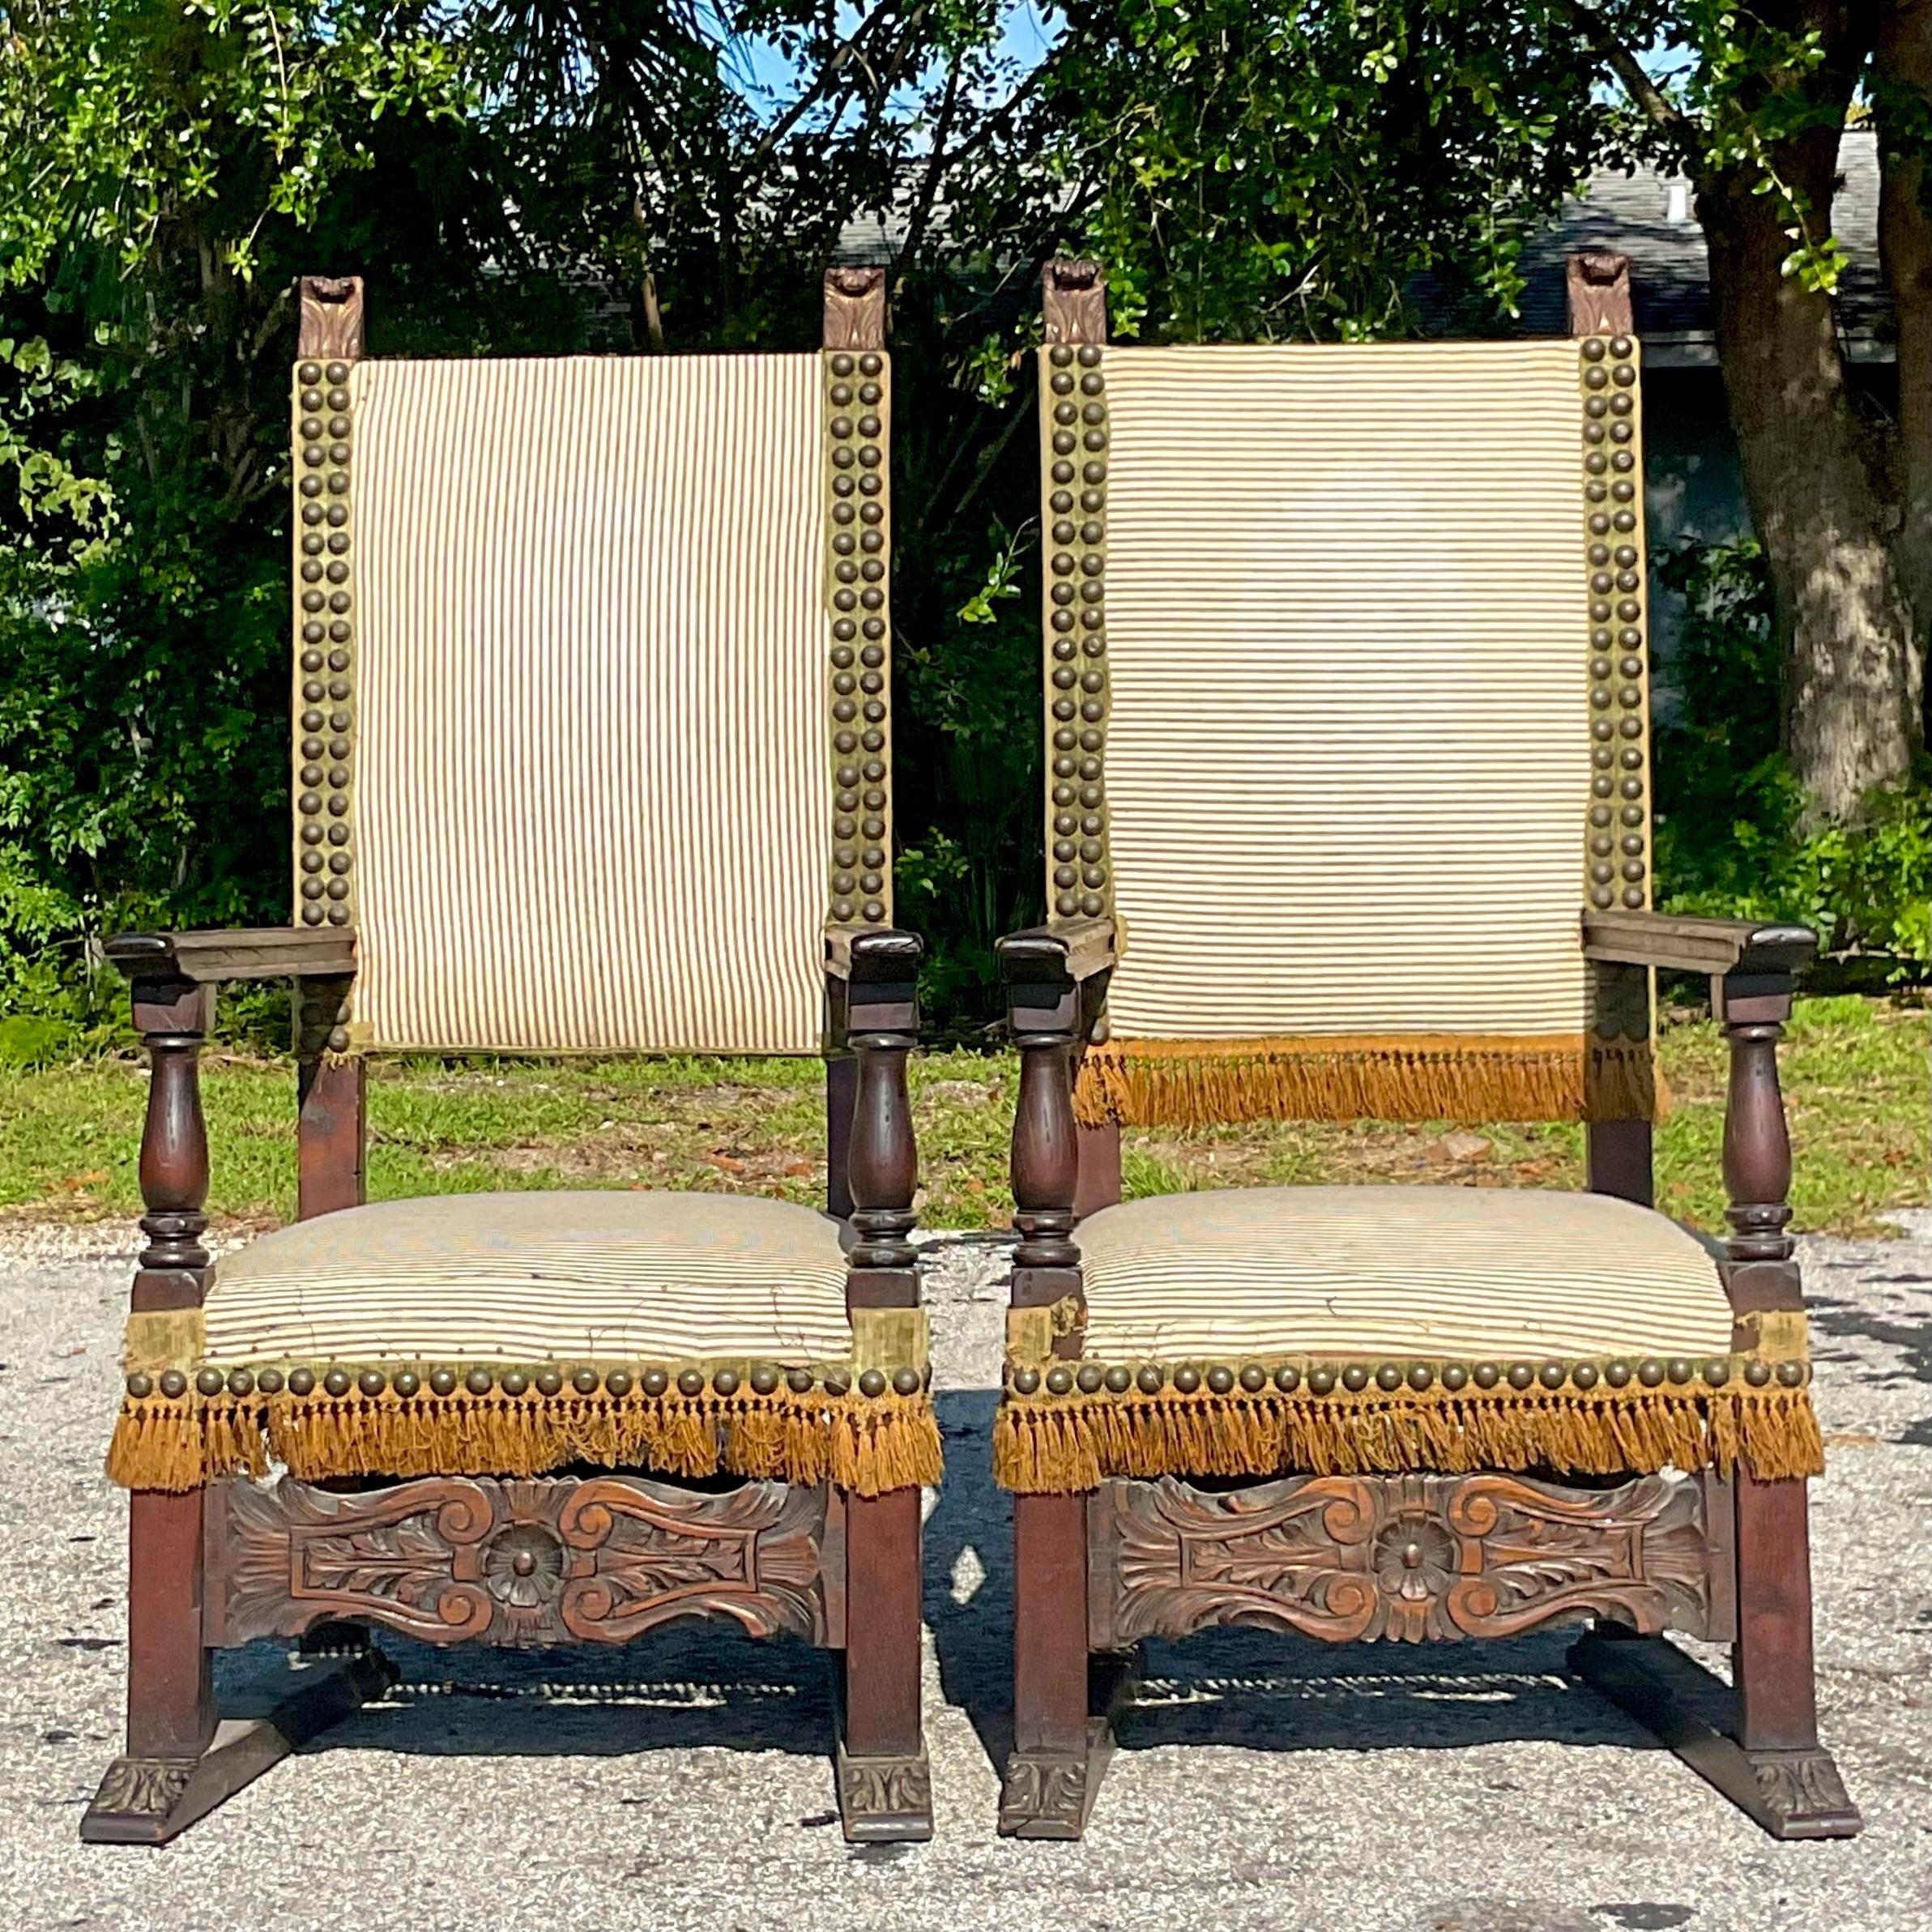 An extraordinary pair of vintage Boho Spanish high back chairs. Hand carved detail and a giant nailhead trim. A mattress ticking upholstery with a golden fringe. These chairs have it all. Acquired from a Palm Beach estate.